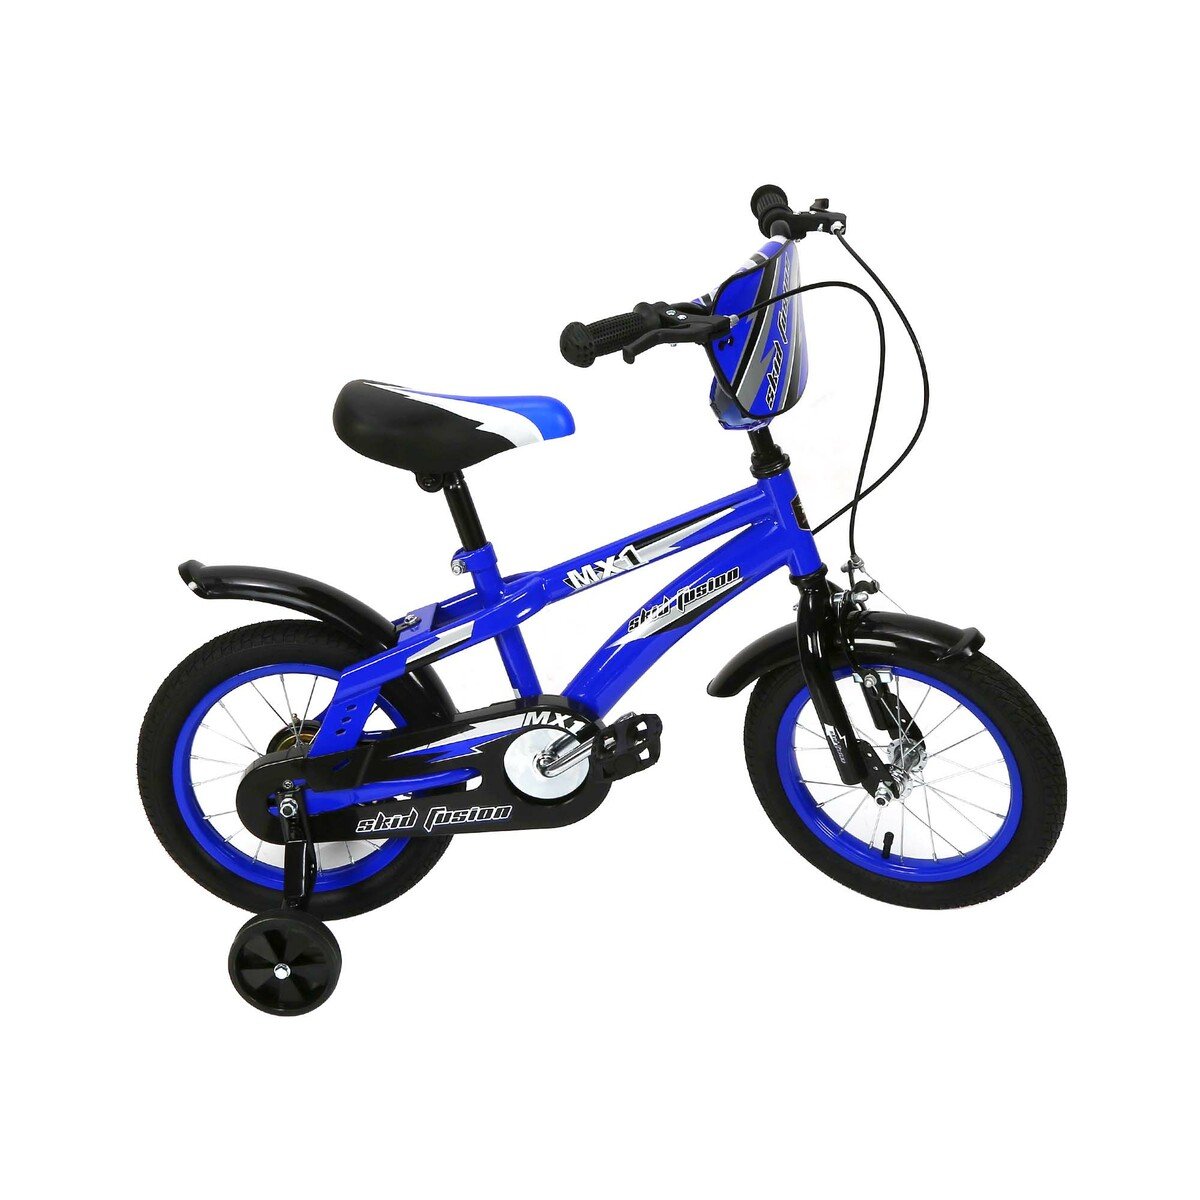 Skid Fusion Kids Bicycle 14" BMX-216B Assorted Color